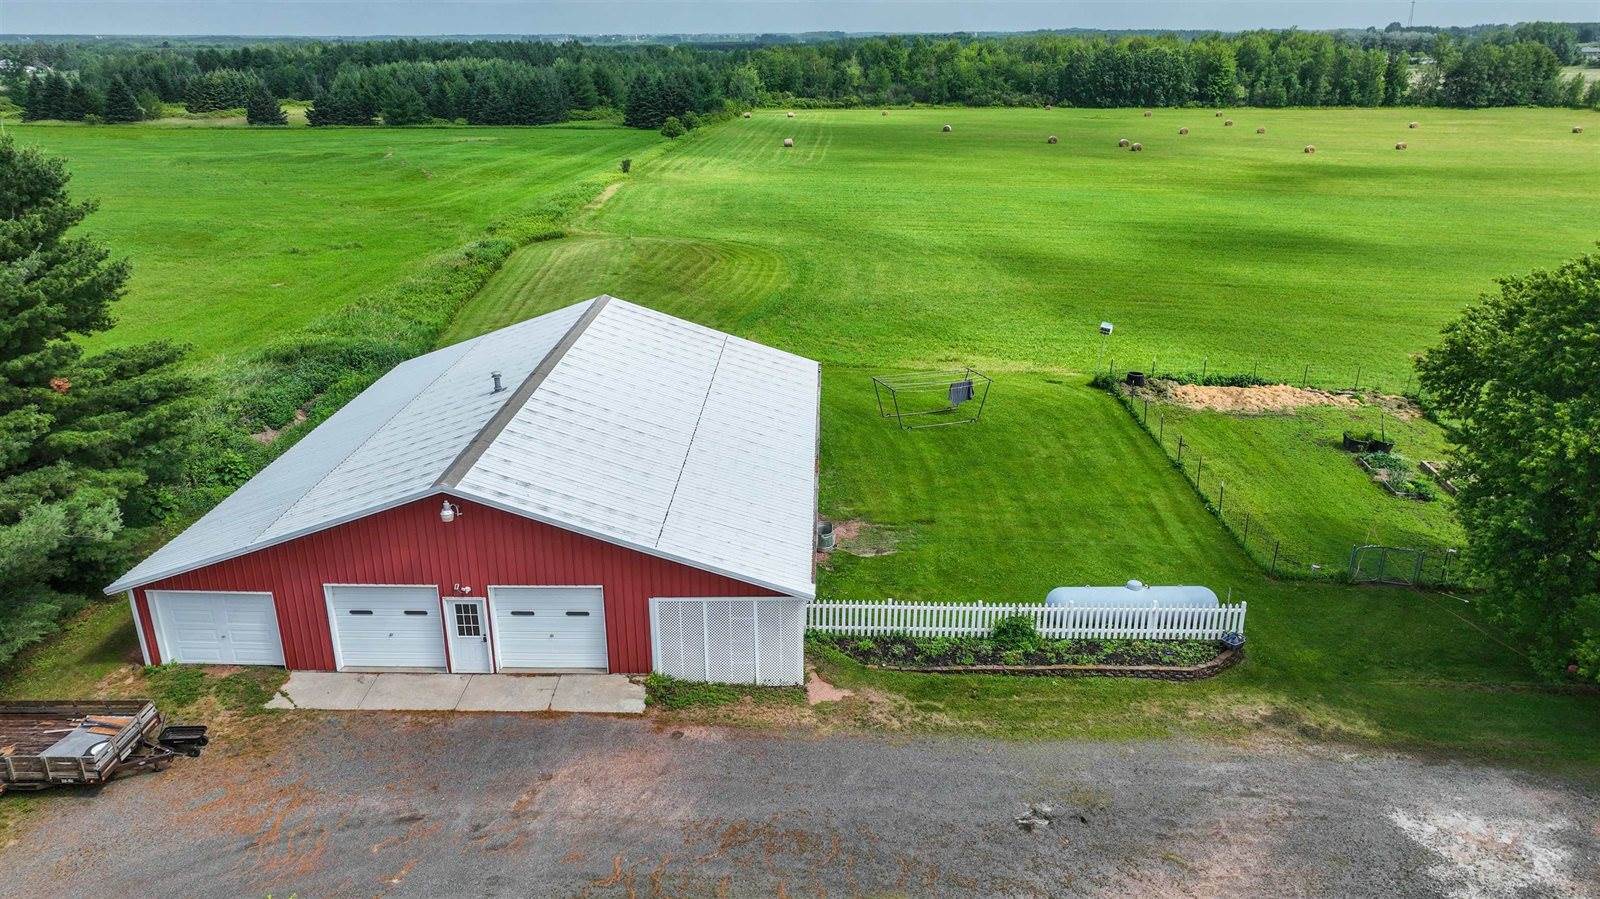 1898 Maple Road, Rudolph, WI 54475